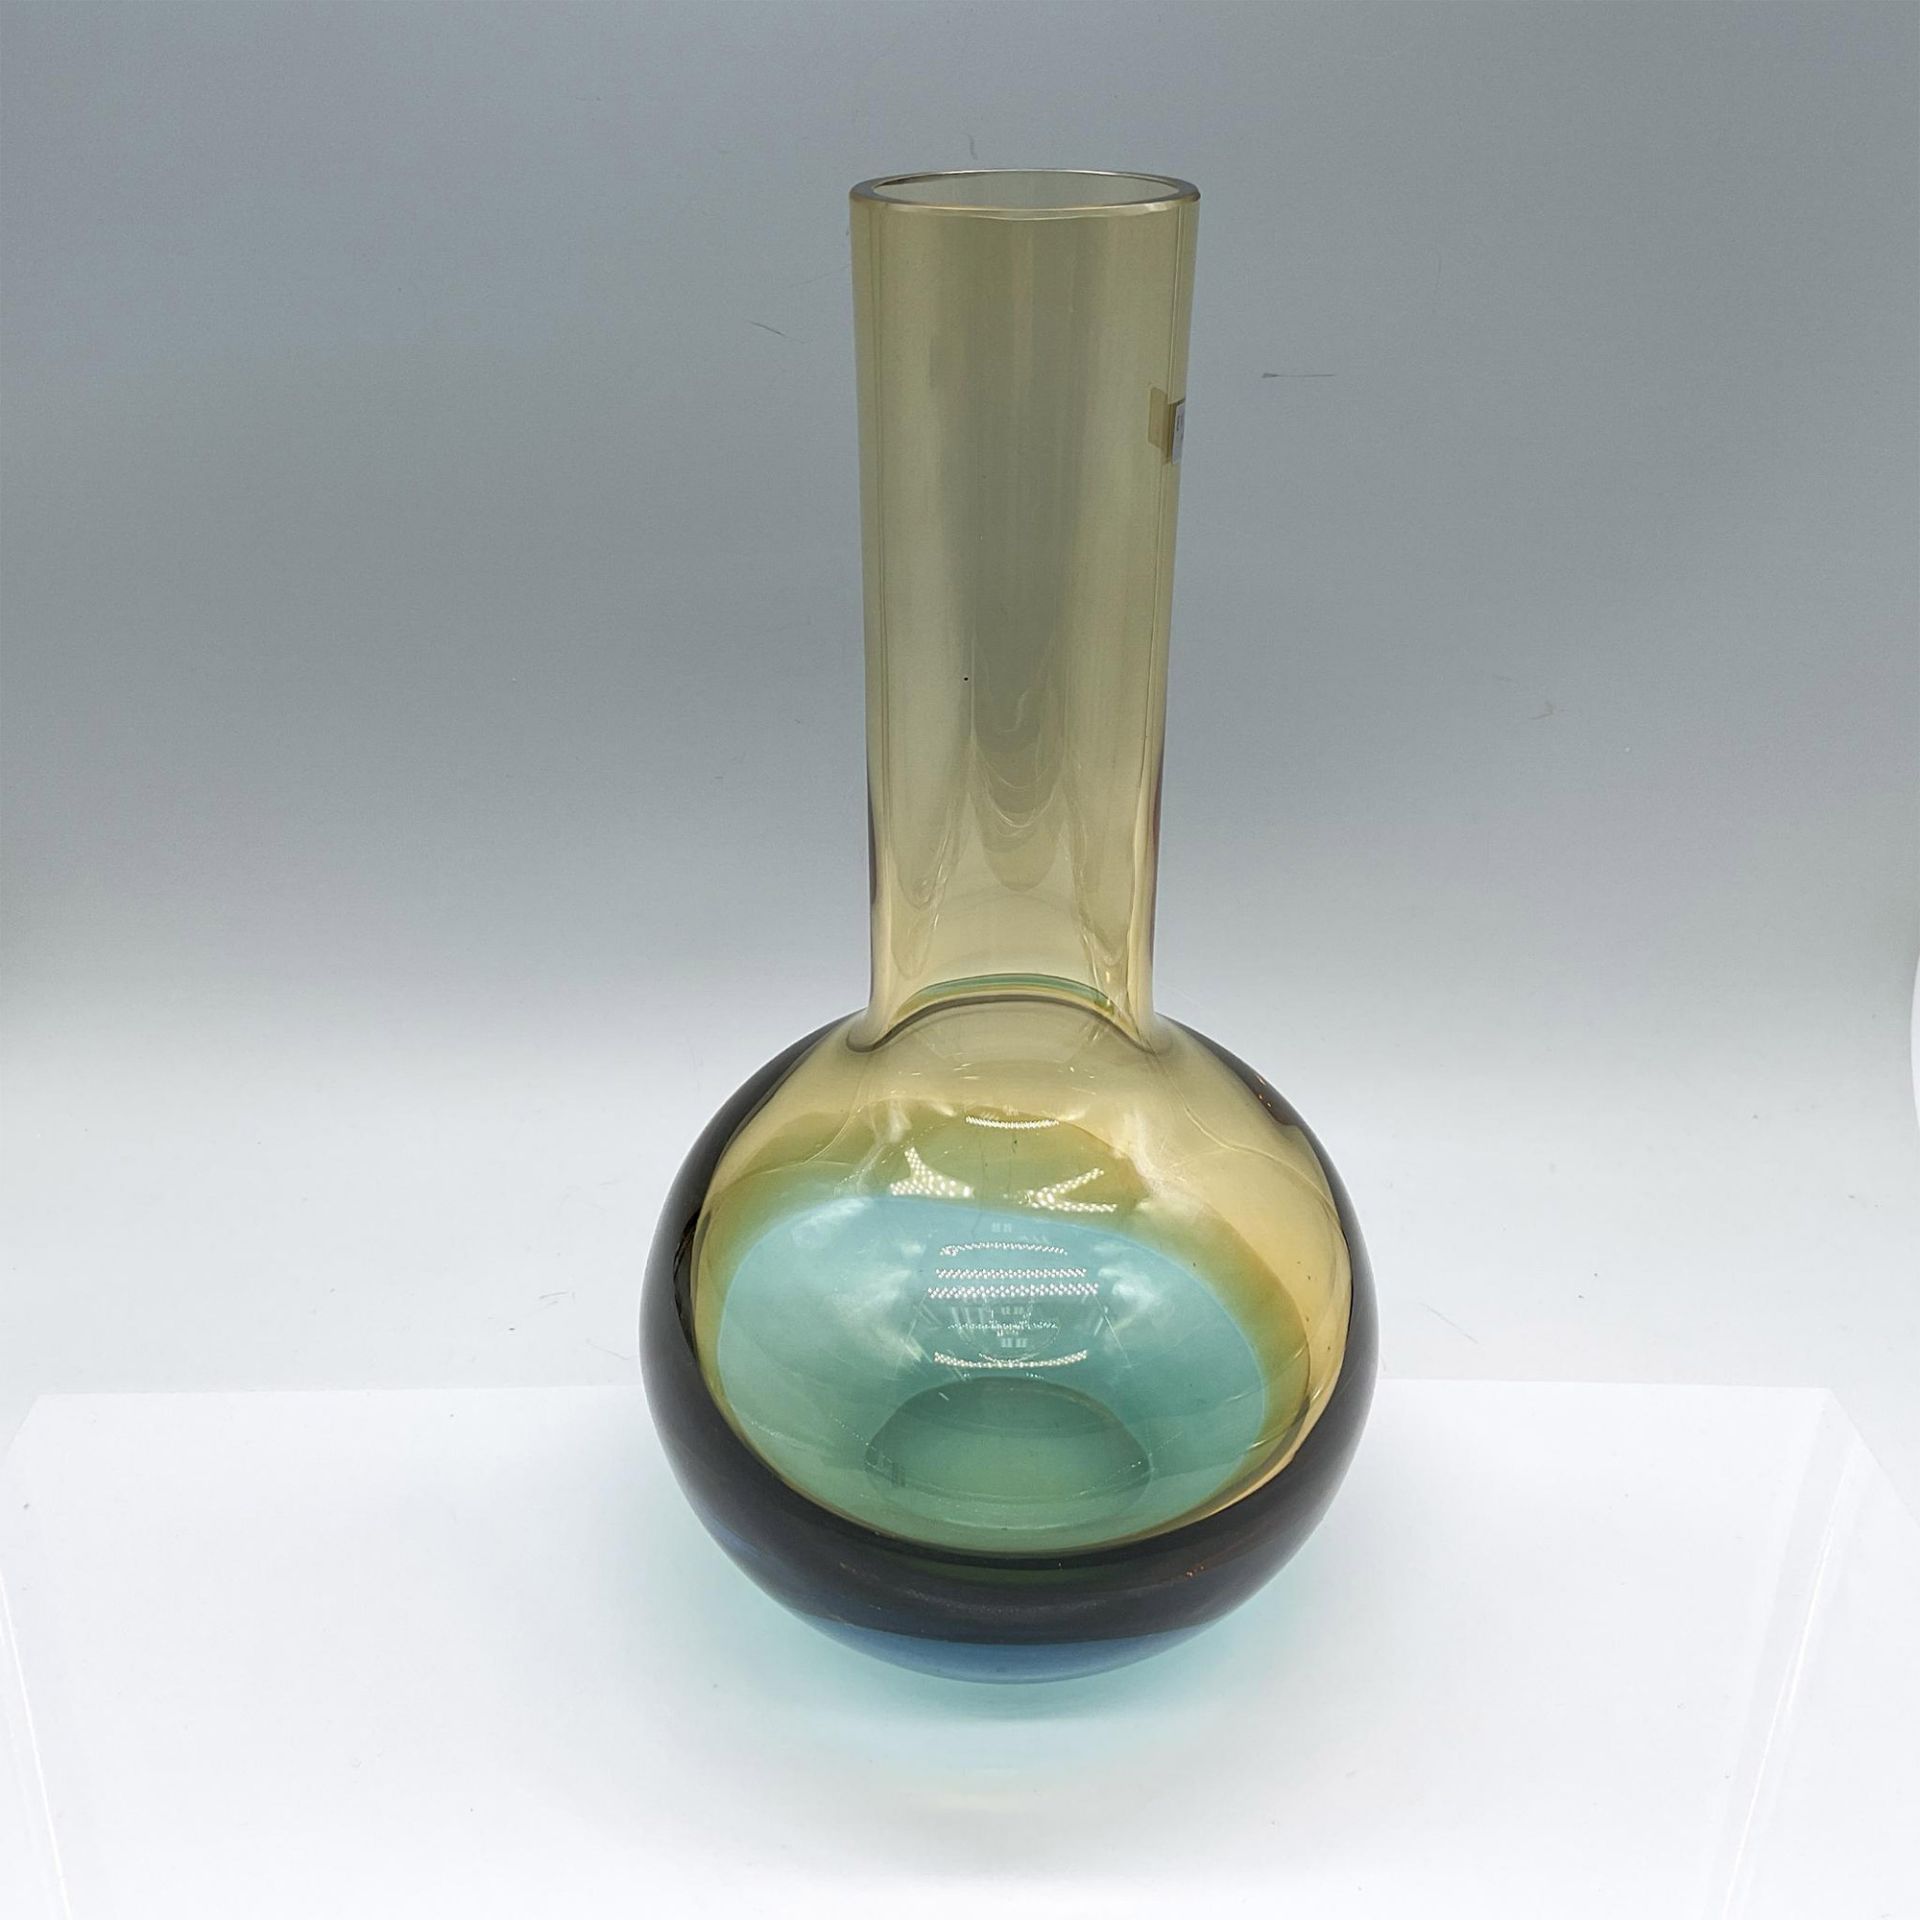 Waterford Turquoise and Amber Vase, Evolution - Image 2 of 3